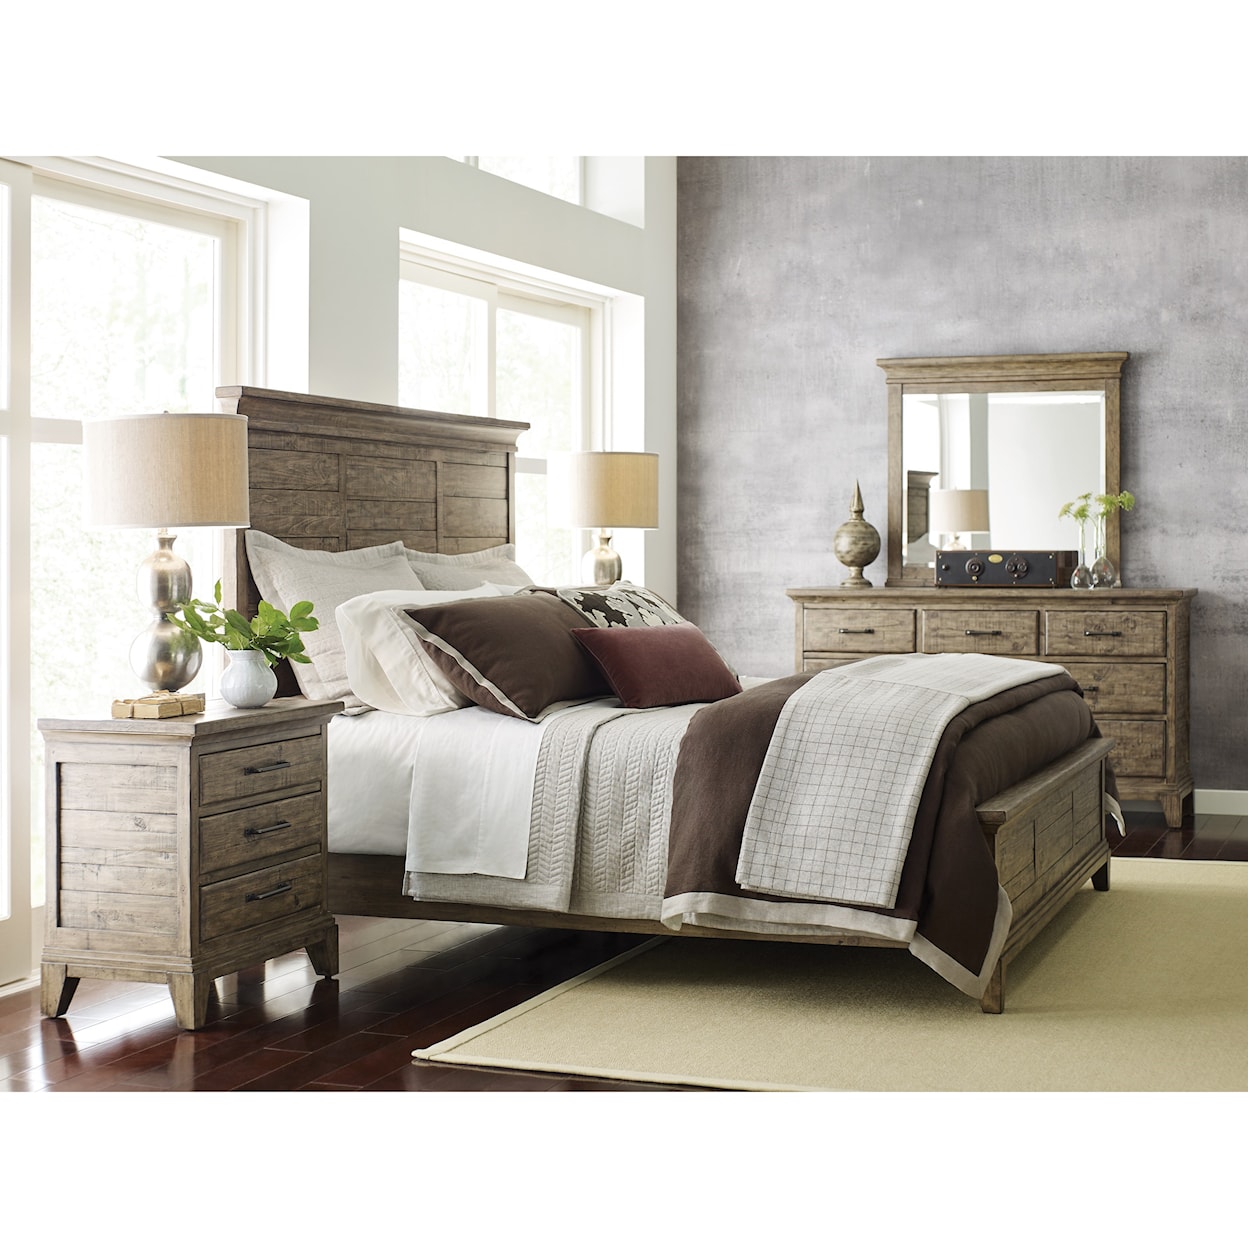 Kincaid Furniture Pike Place Jessup Panel King Bed       